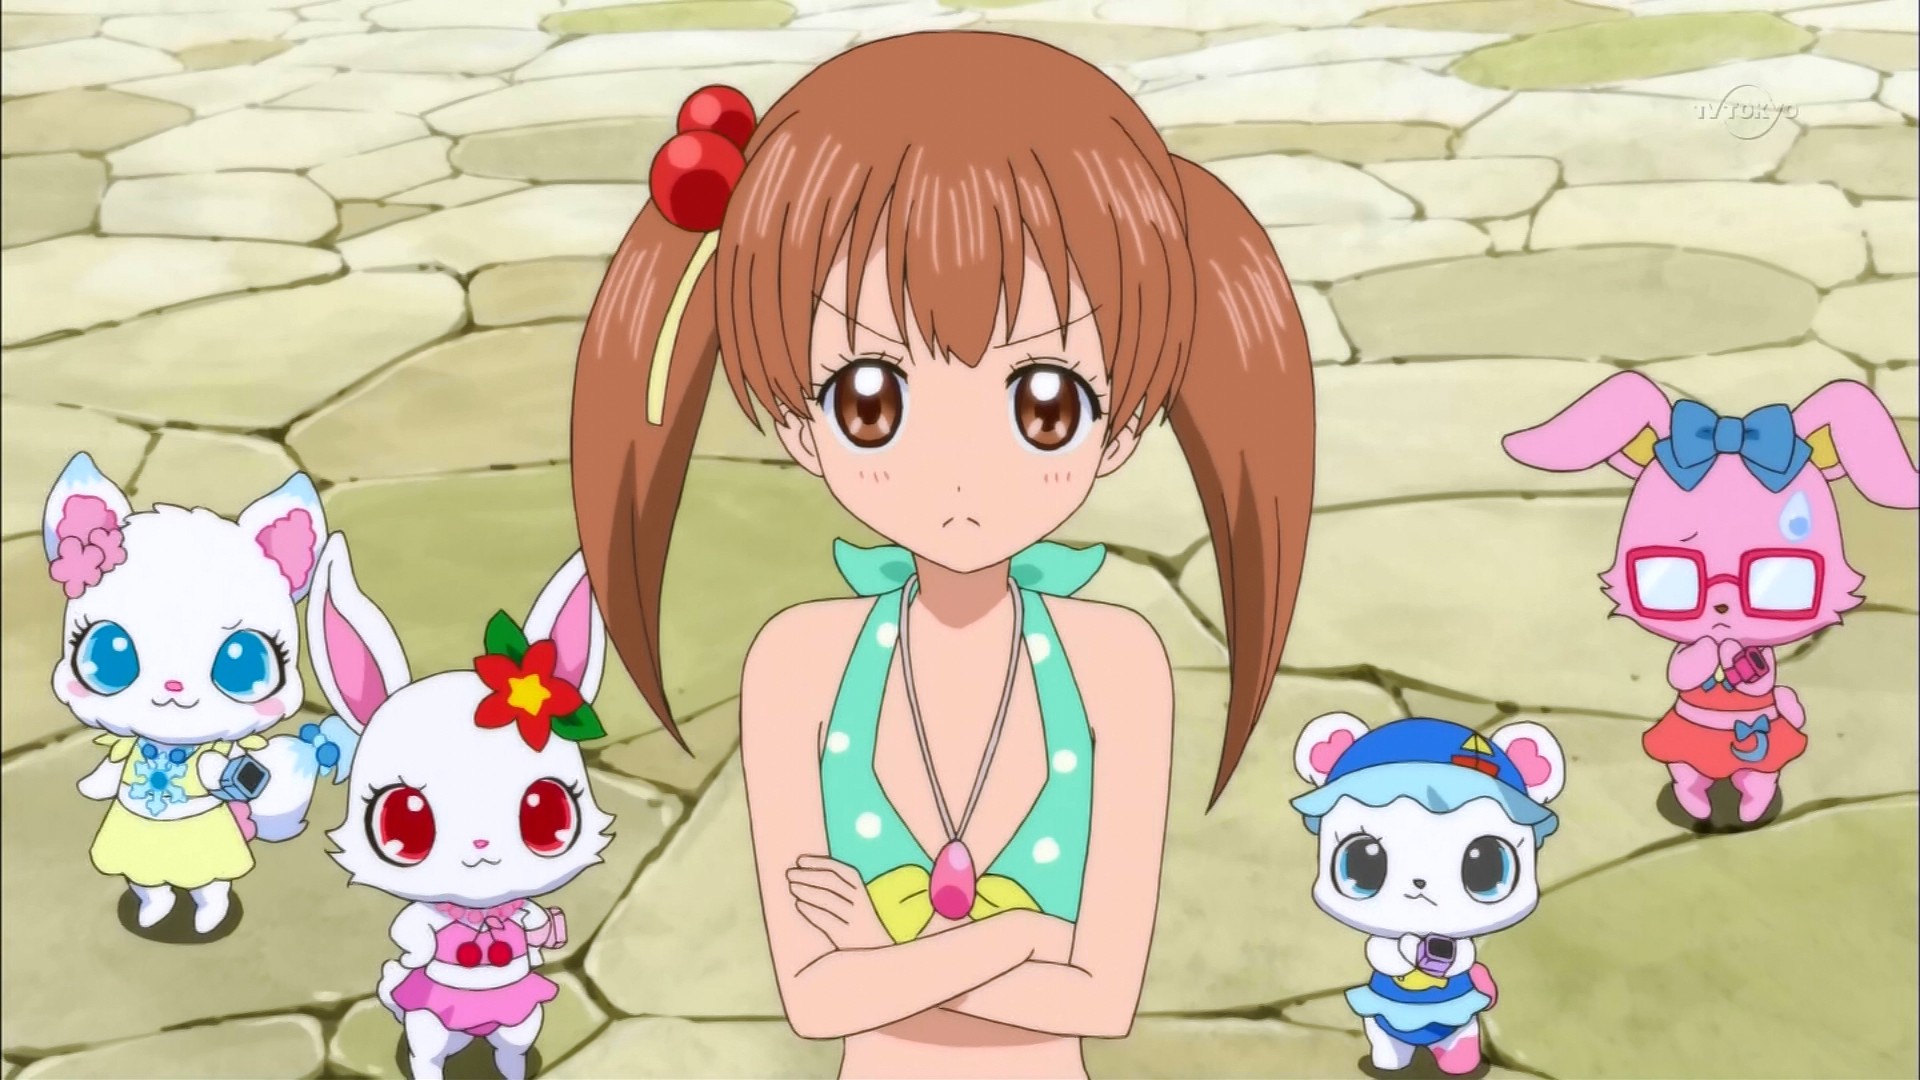 Jewelpet Magical Girl Anime Gets 6th TV Show in April - News - Anime News  Network